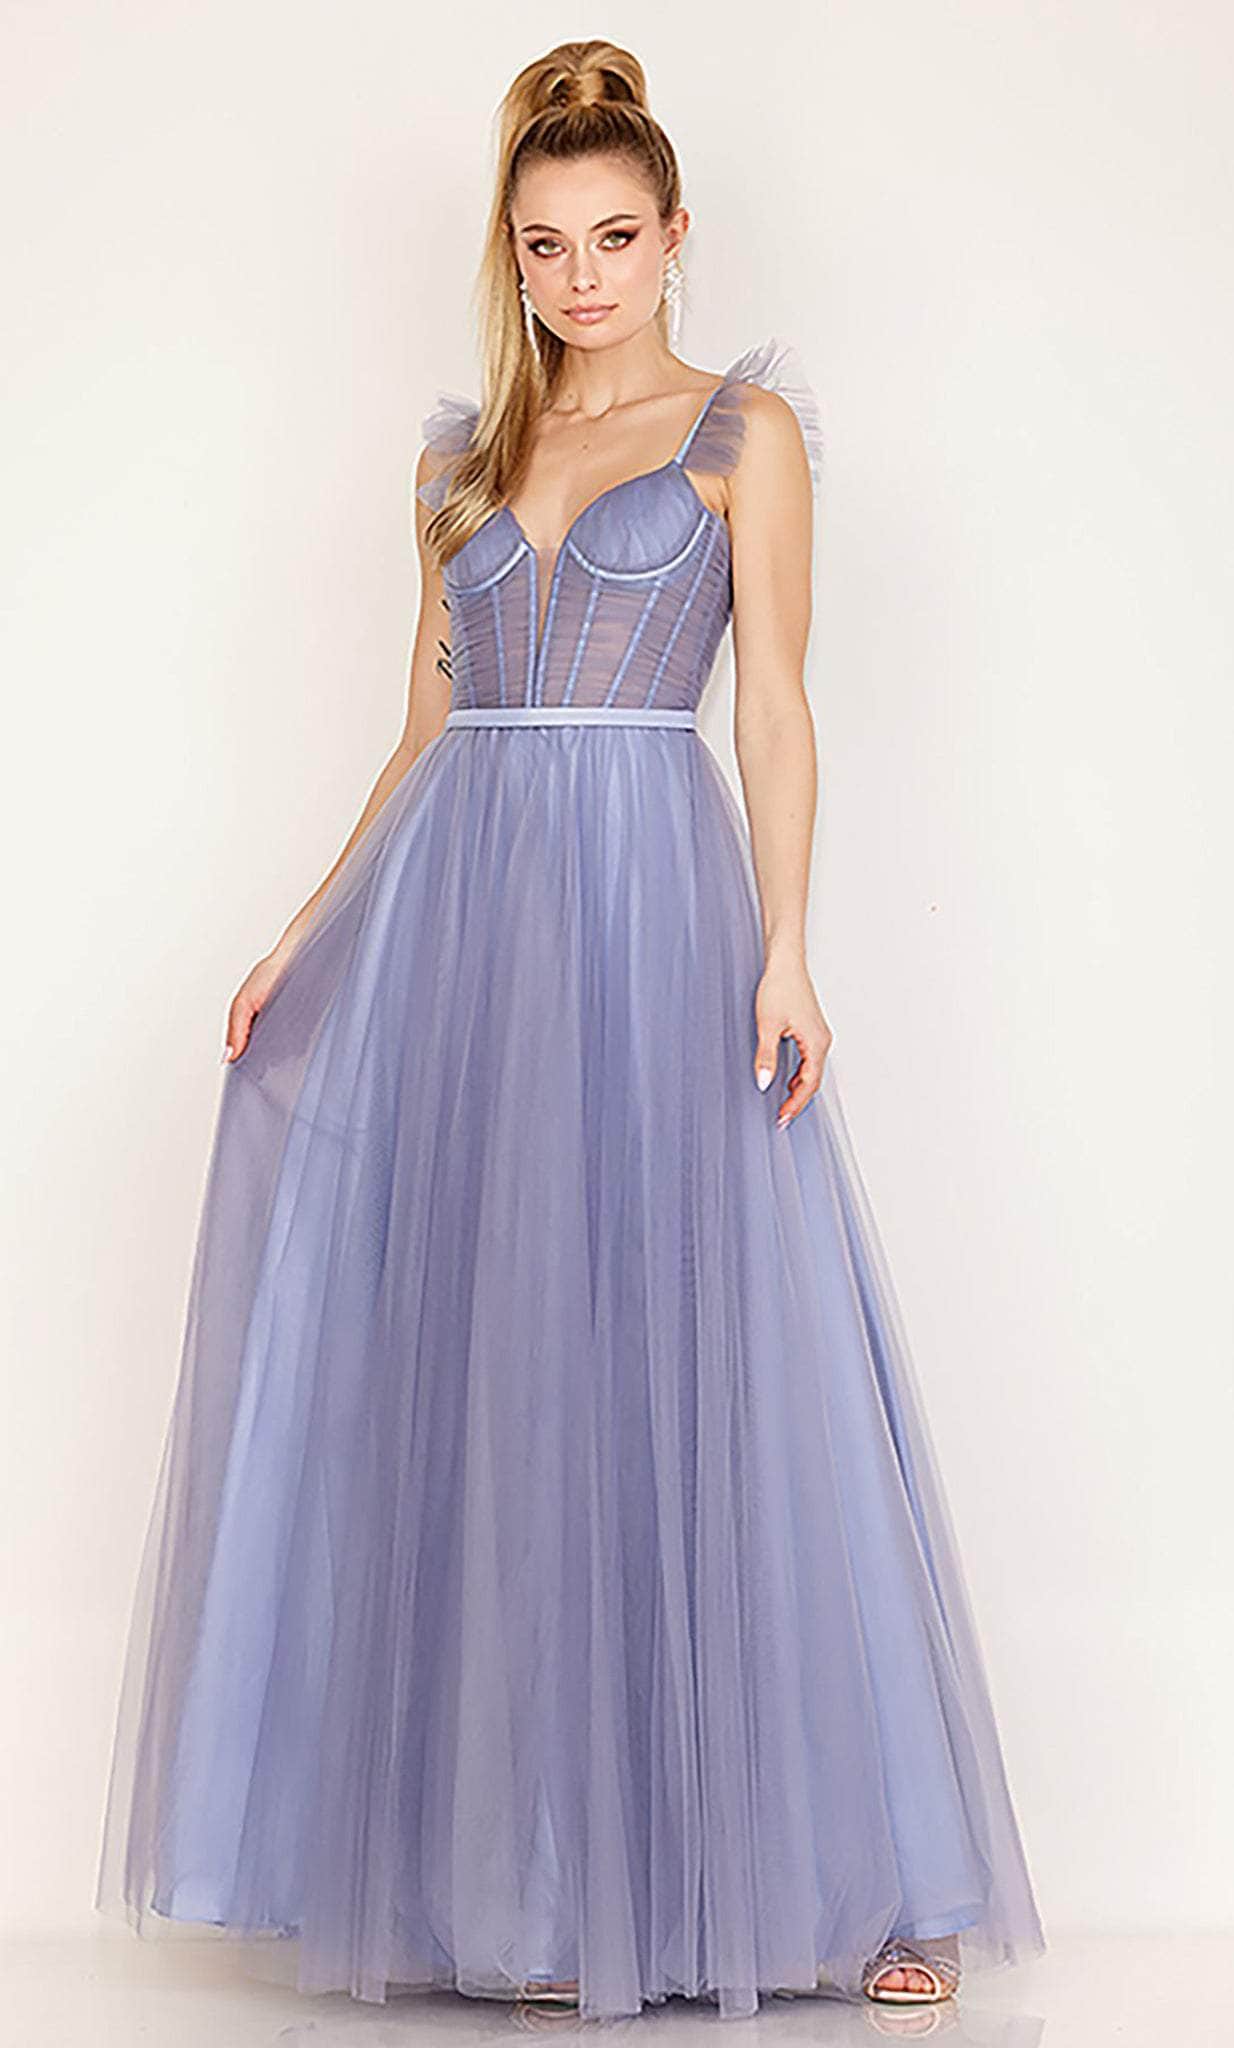 Cecilia Couture 163 - Sleeveless A-line Prom Dress Prom Dresses 6 / Dusty Blue